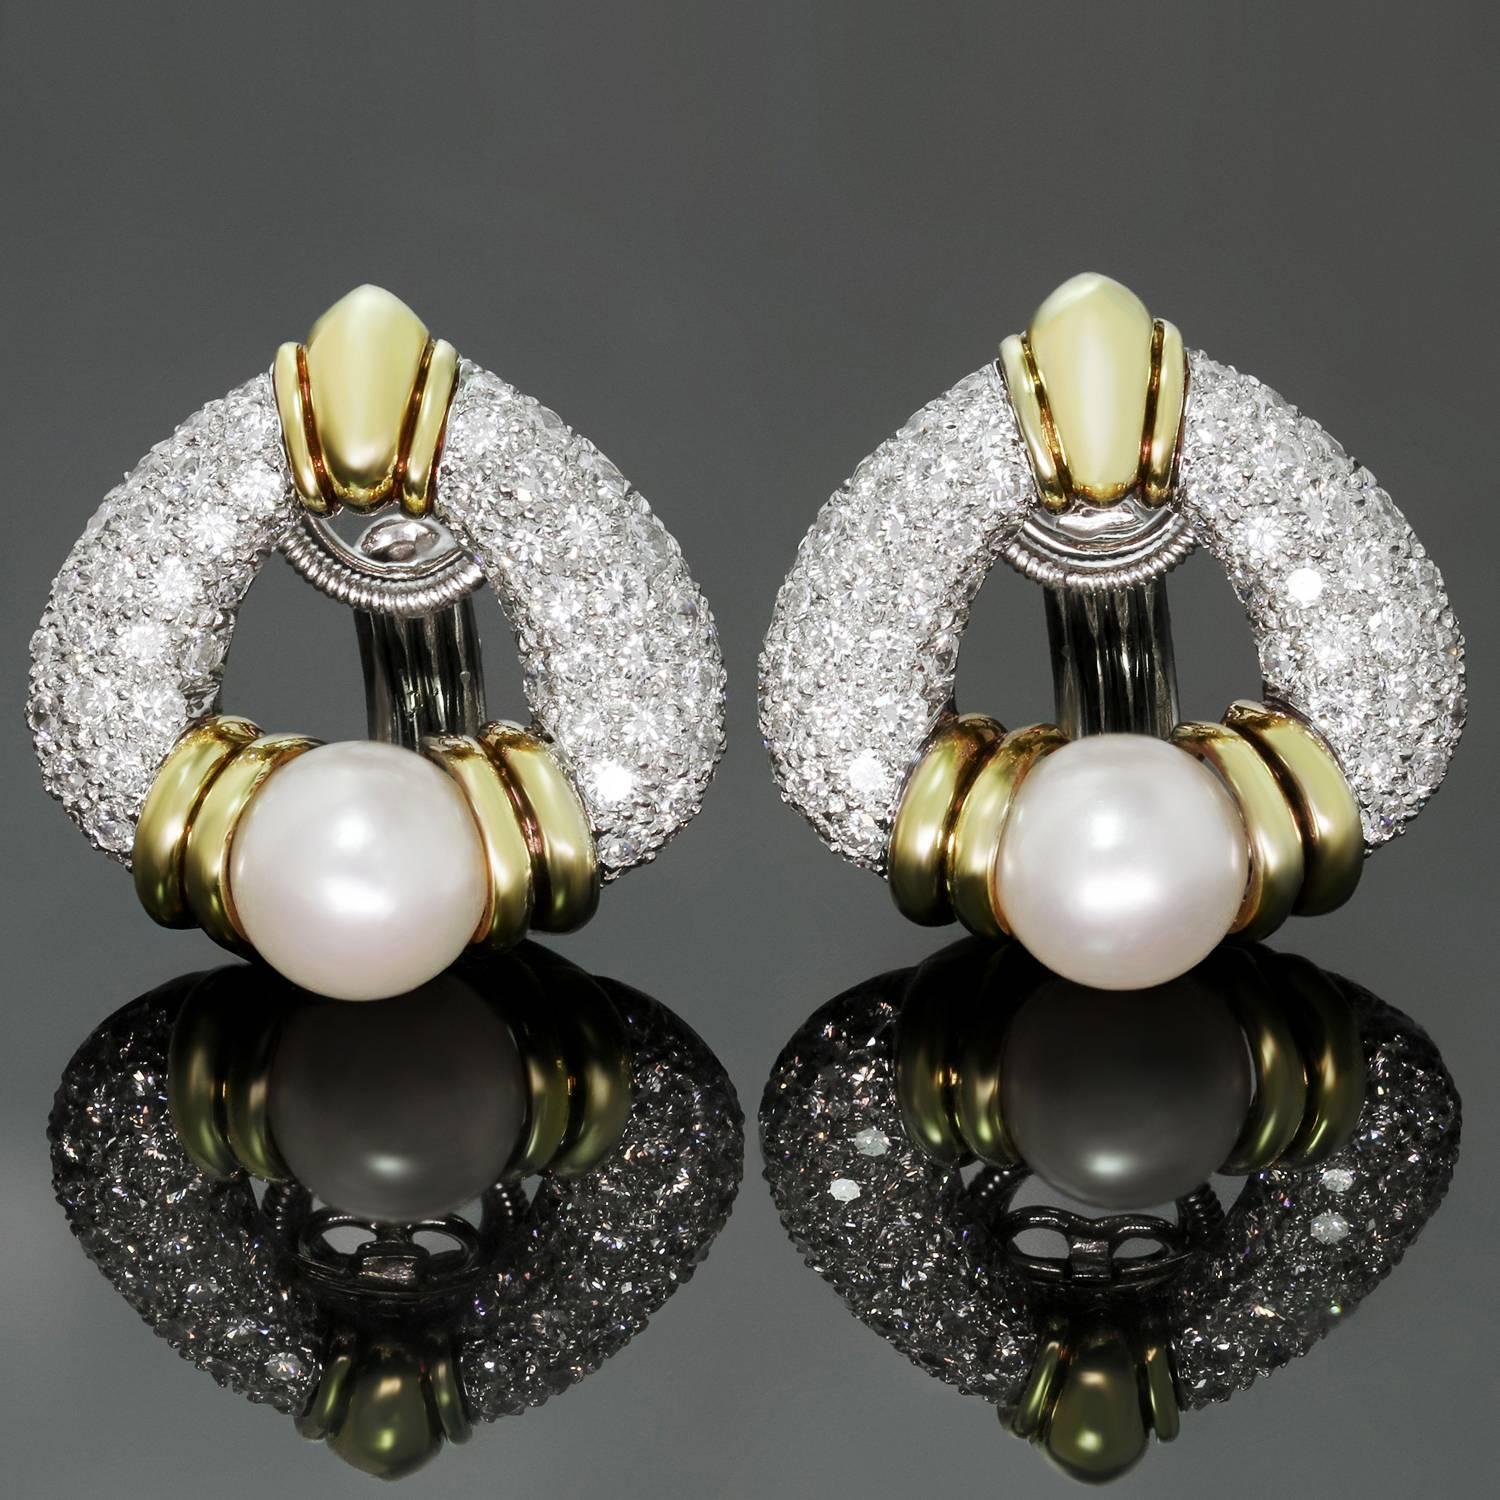 These stunning Harry Winston earrings are crafted in platinum with 18k yellow gold accents and set with cultured pearls and sparkling brilliant-cut round diamonds of an estimated 3.0 carats. These  earrings feature fabulous rotatable clip-on backs